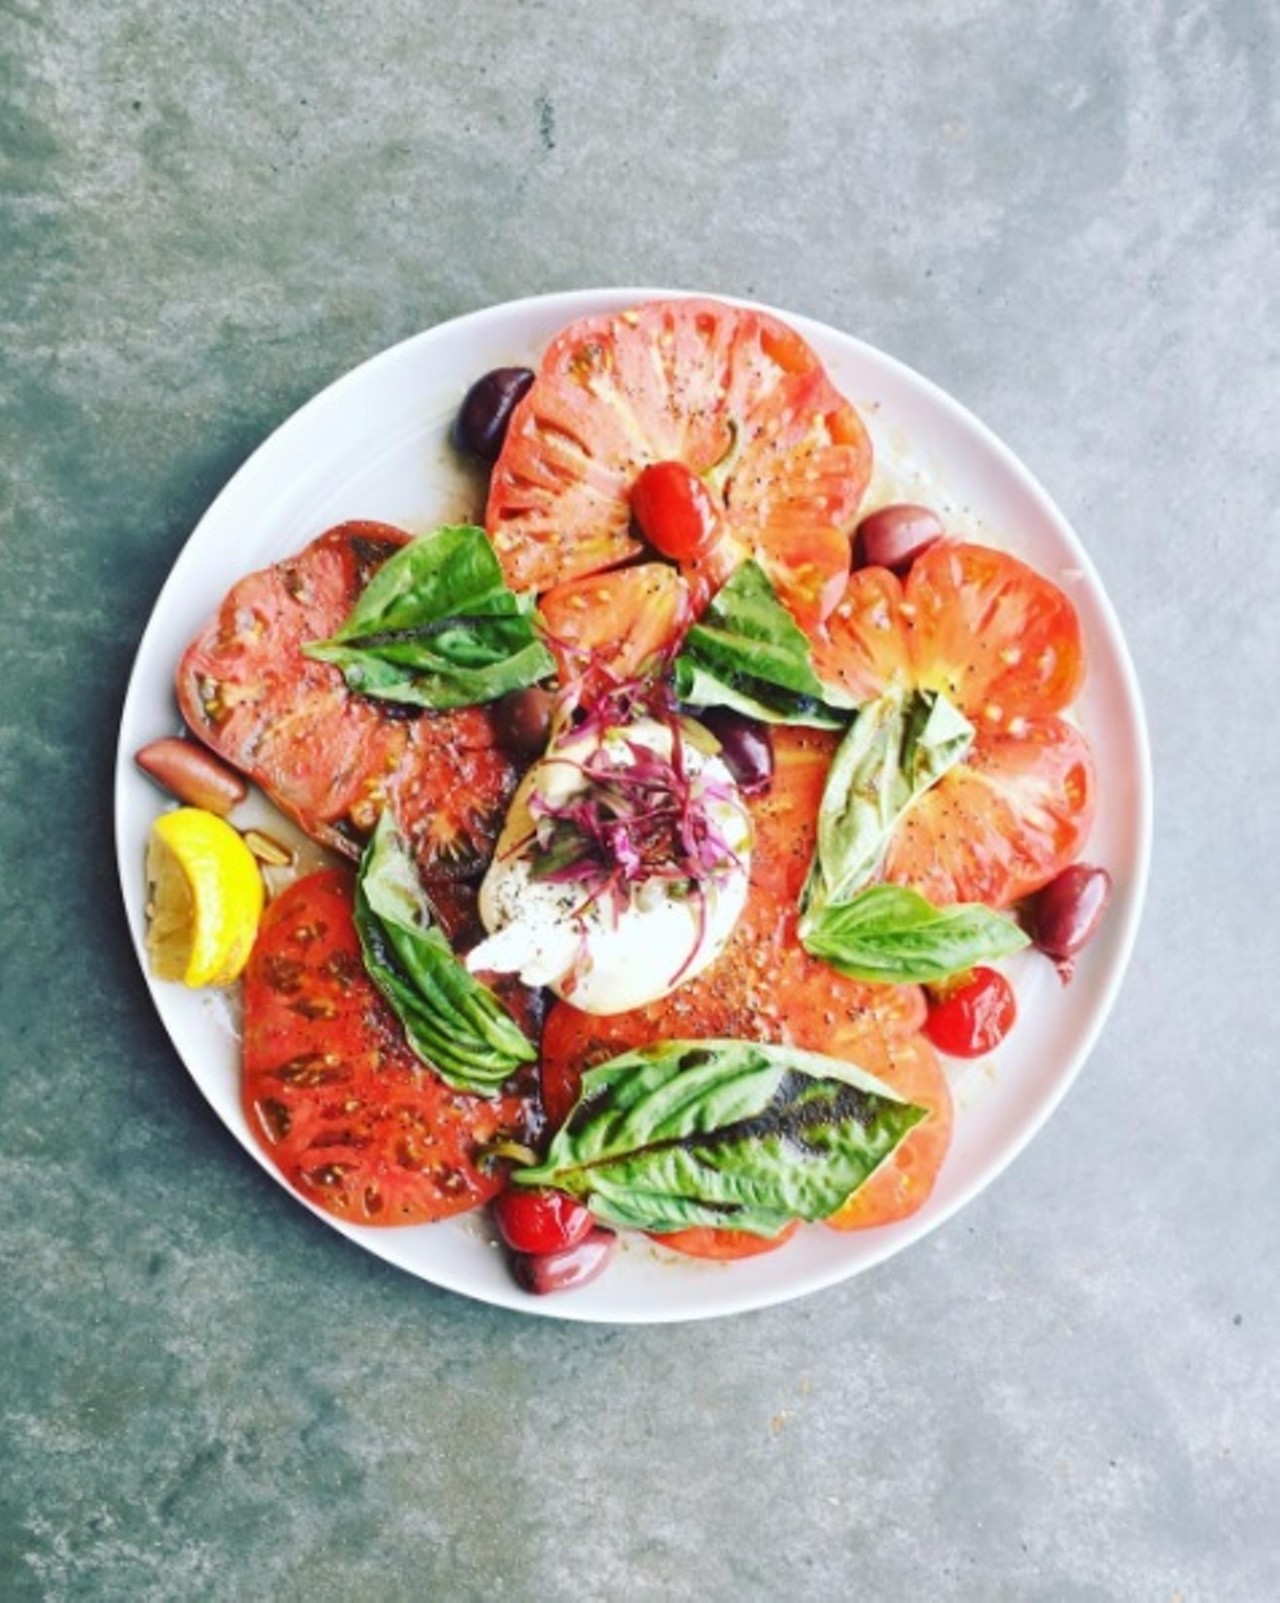 Sherrie Castellano
Instagram: withfoodandlove
Blog: withfoodandlove.com
A transplant from the East Coast, Castellano's blog focuses on gluten-free and vegetarian recipes. Pictured: heirlooms and burrata at Katie's Pizza and Pasta (9568 Manchester Rd., 314-942-6555). Photo courtesy of Instagram / withfoodandlove.